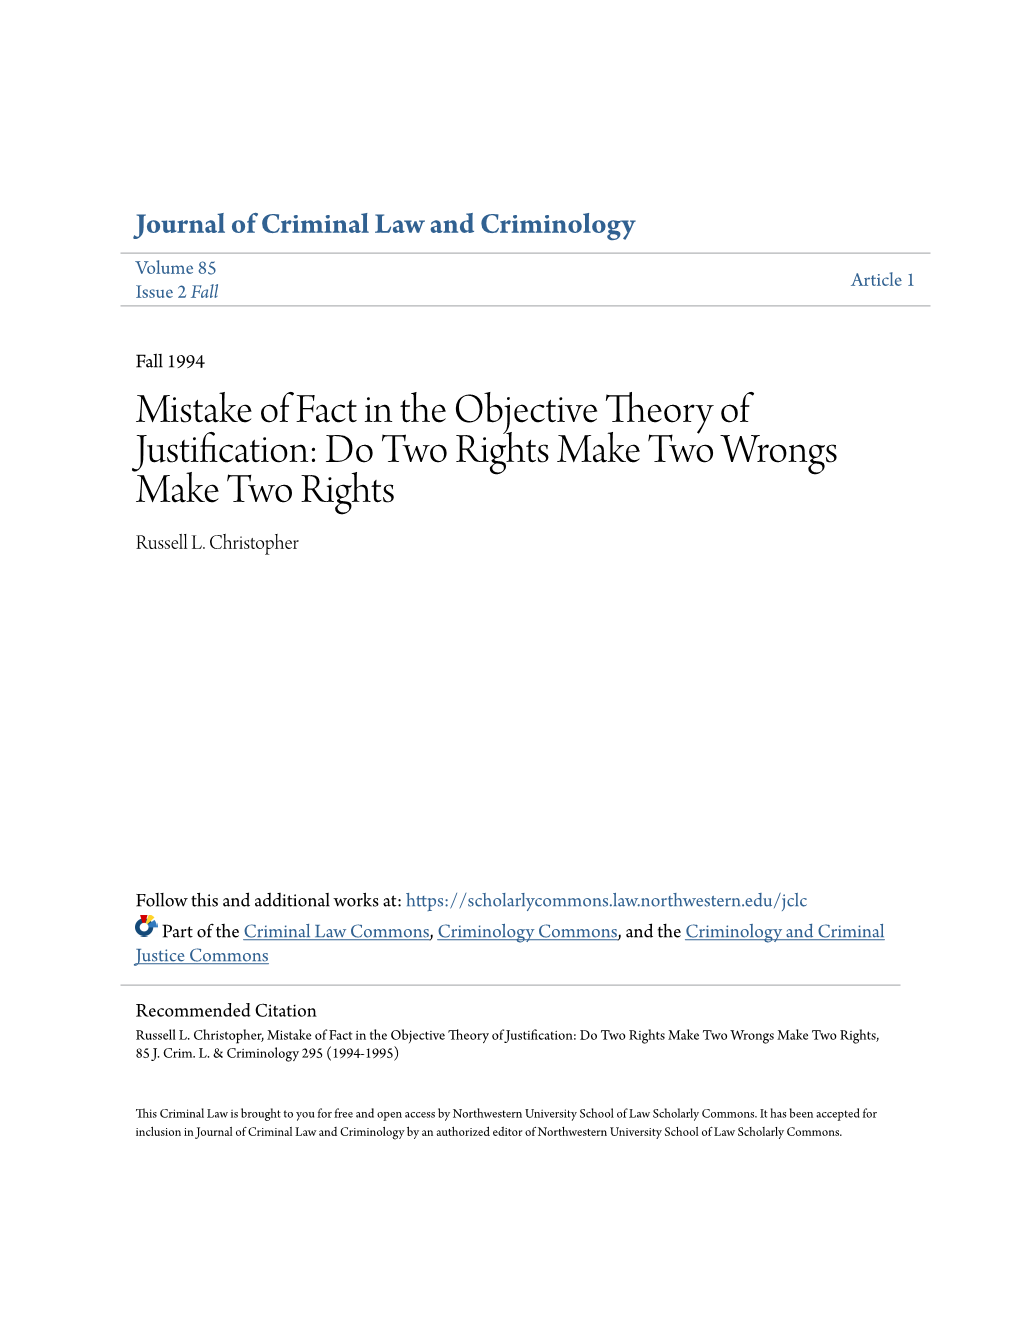 Mistake of Fact in the Objective Theory of Justification: Do Two Rights Make Two Wrongs Make Two Rights Russell L